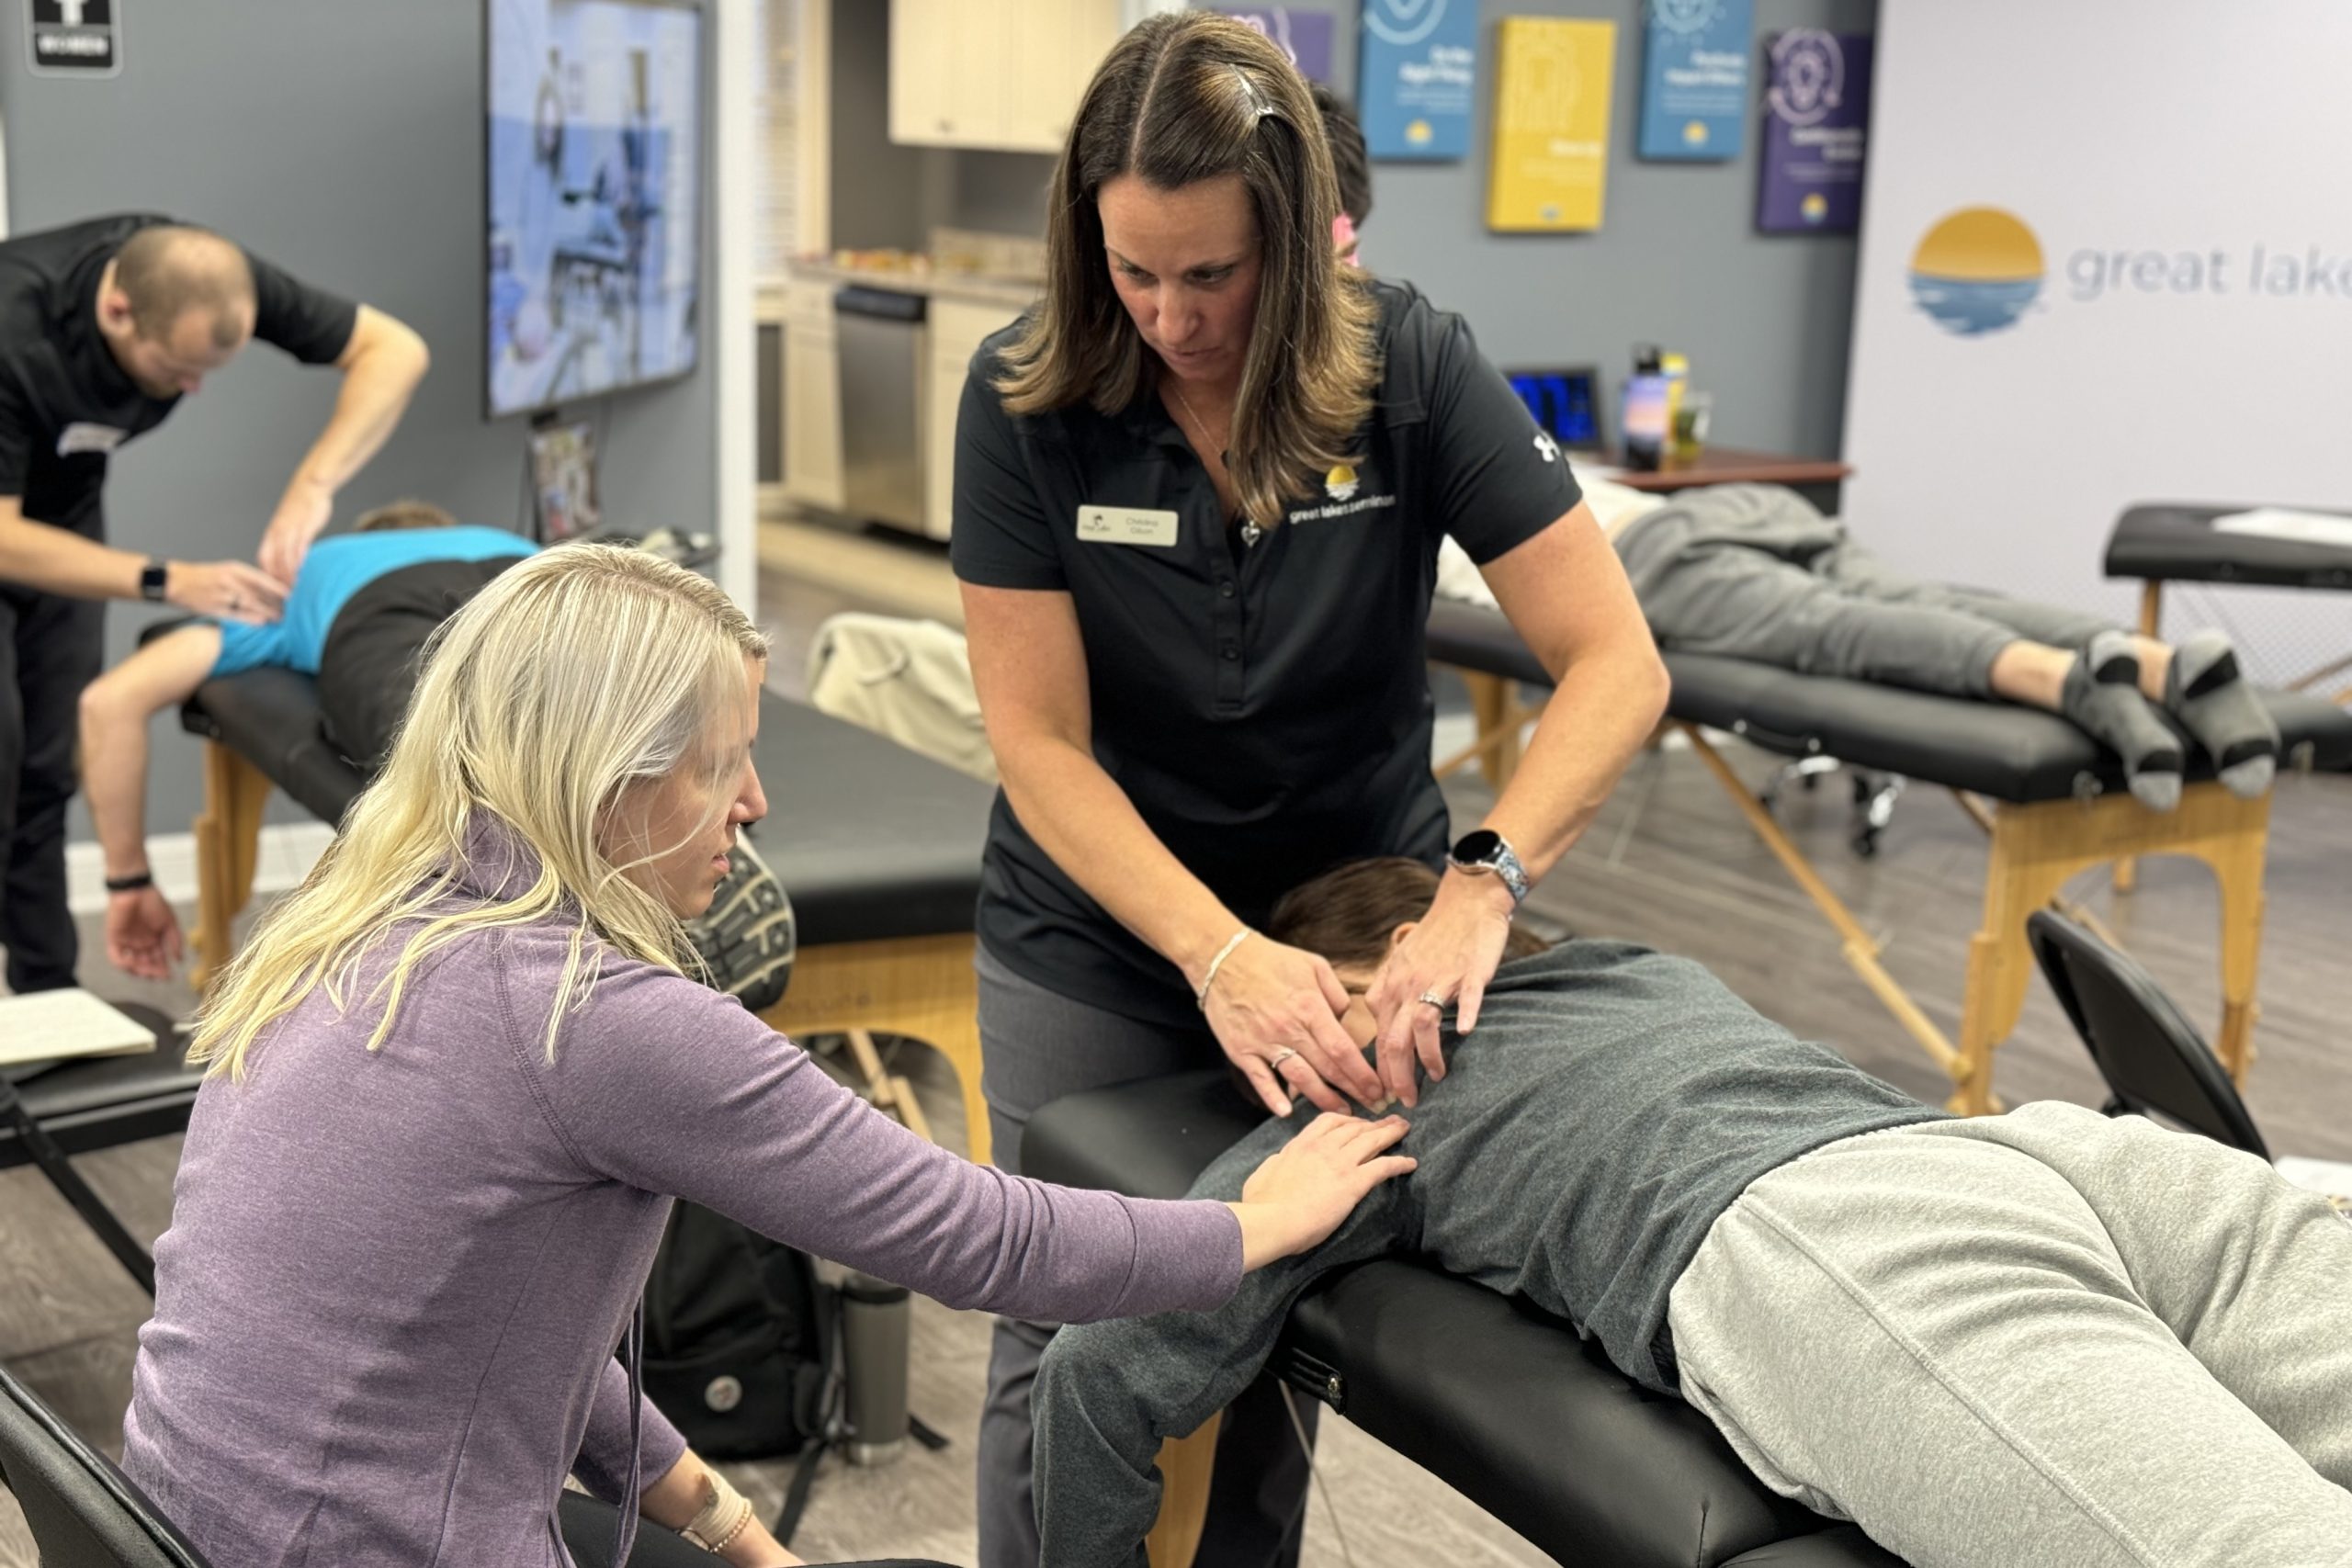 CEU course instructor teaching new MFR techniques to a physical therapist